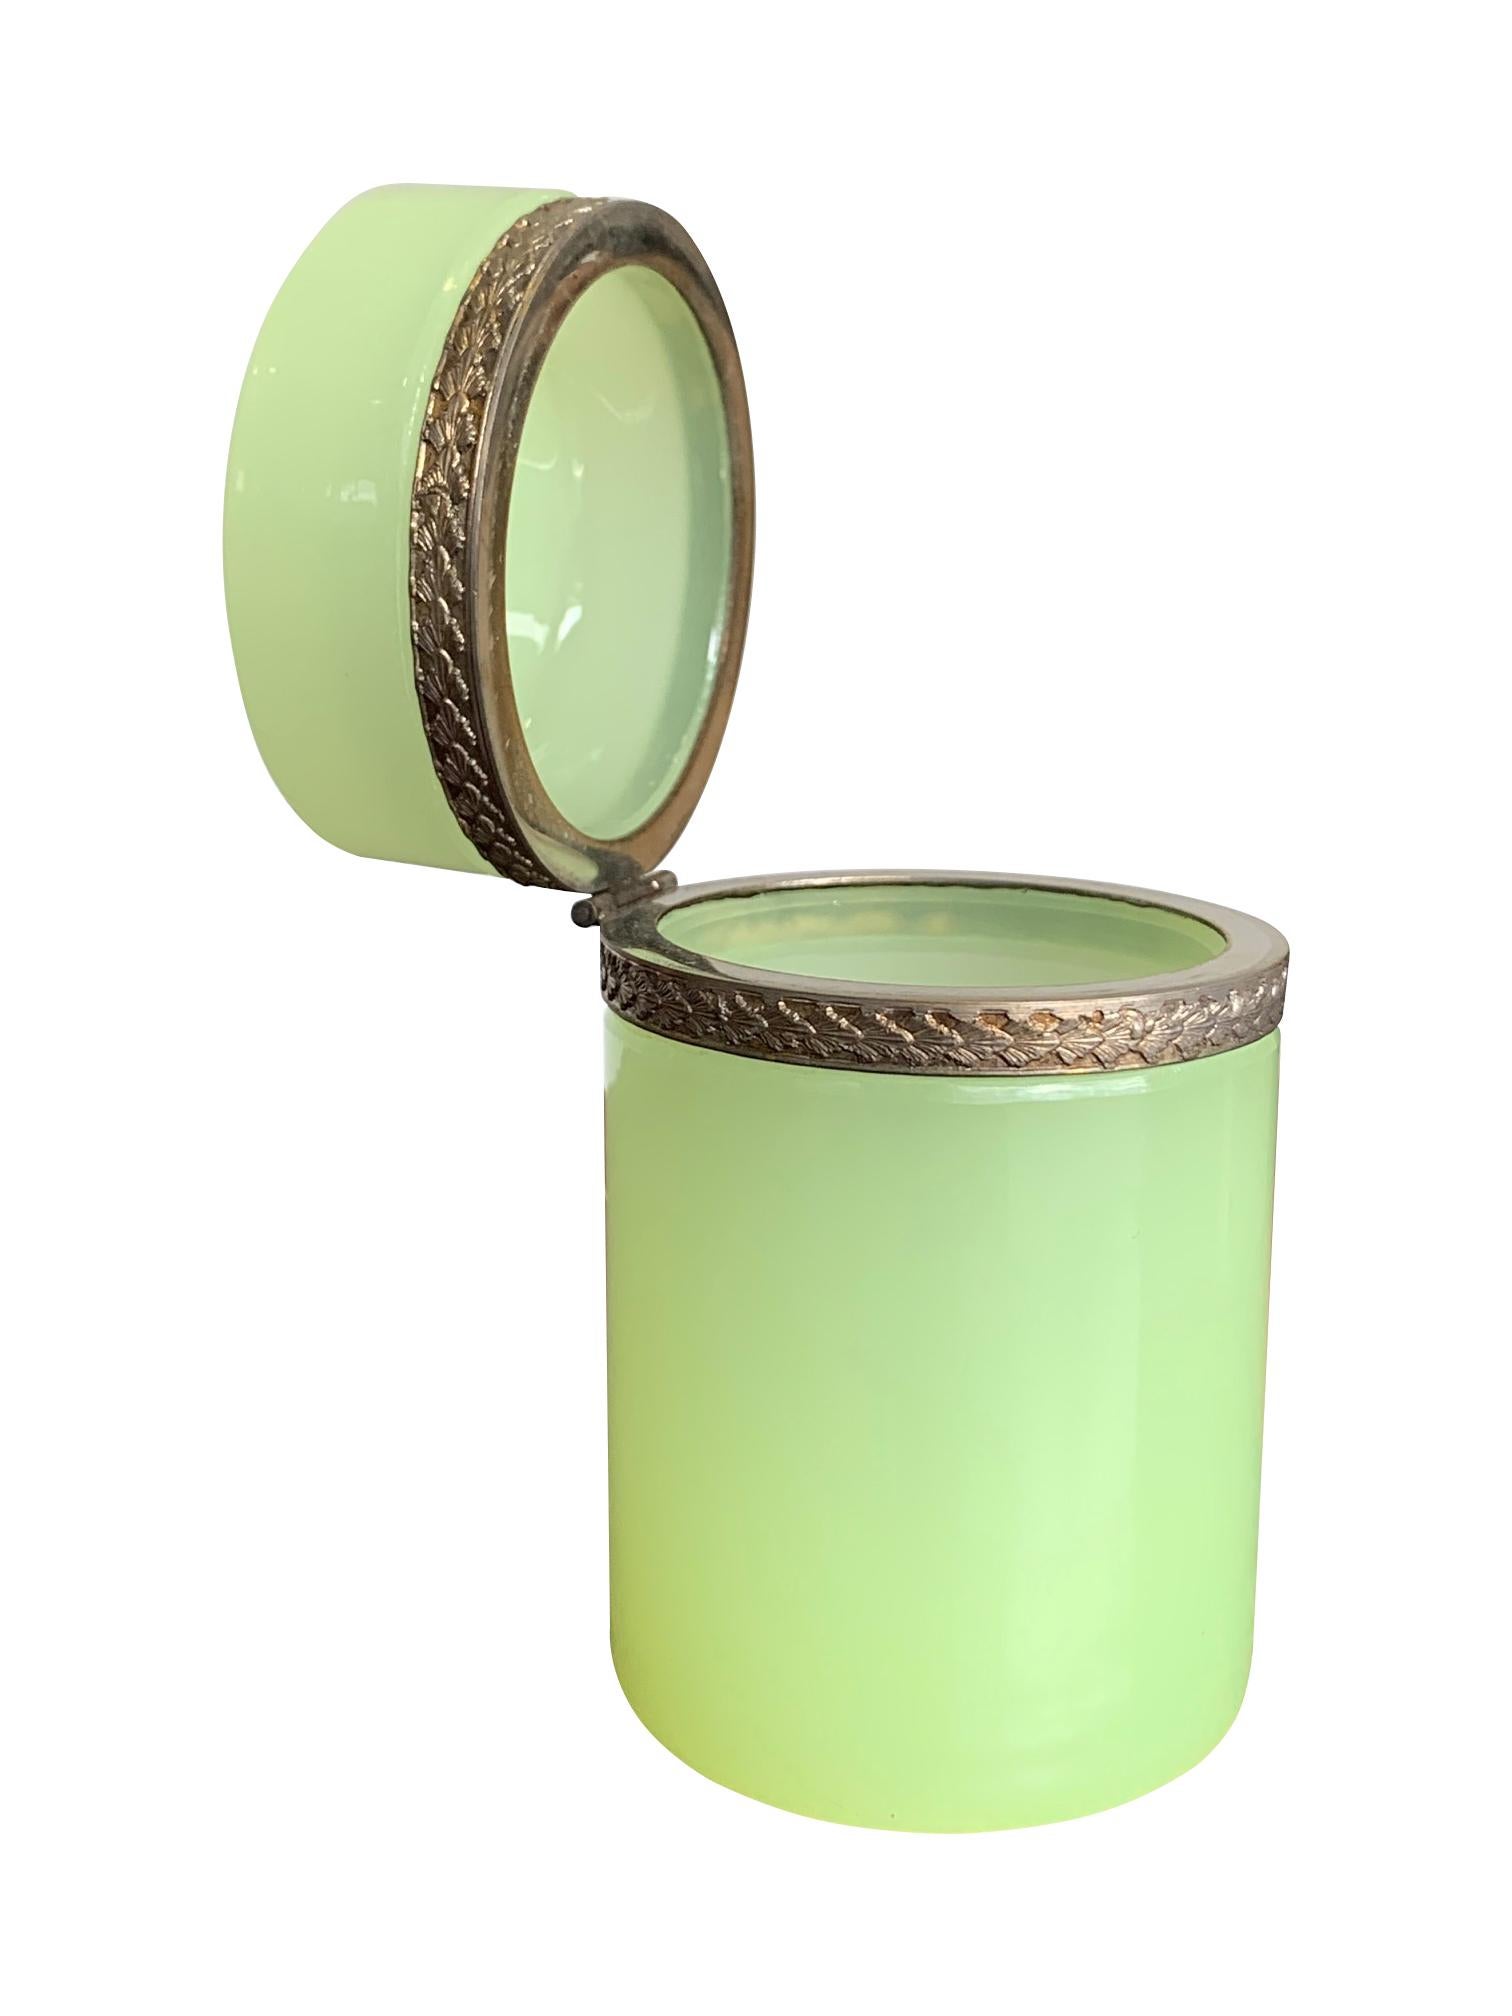 A stunning lime green Murano glass hinged box by Giovanni Cendese, Murano Italy with silvered collar detail and hinge.

 